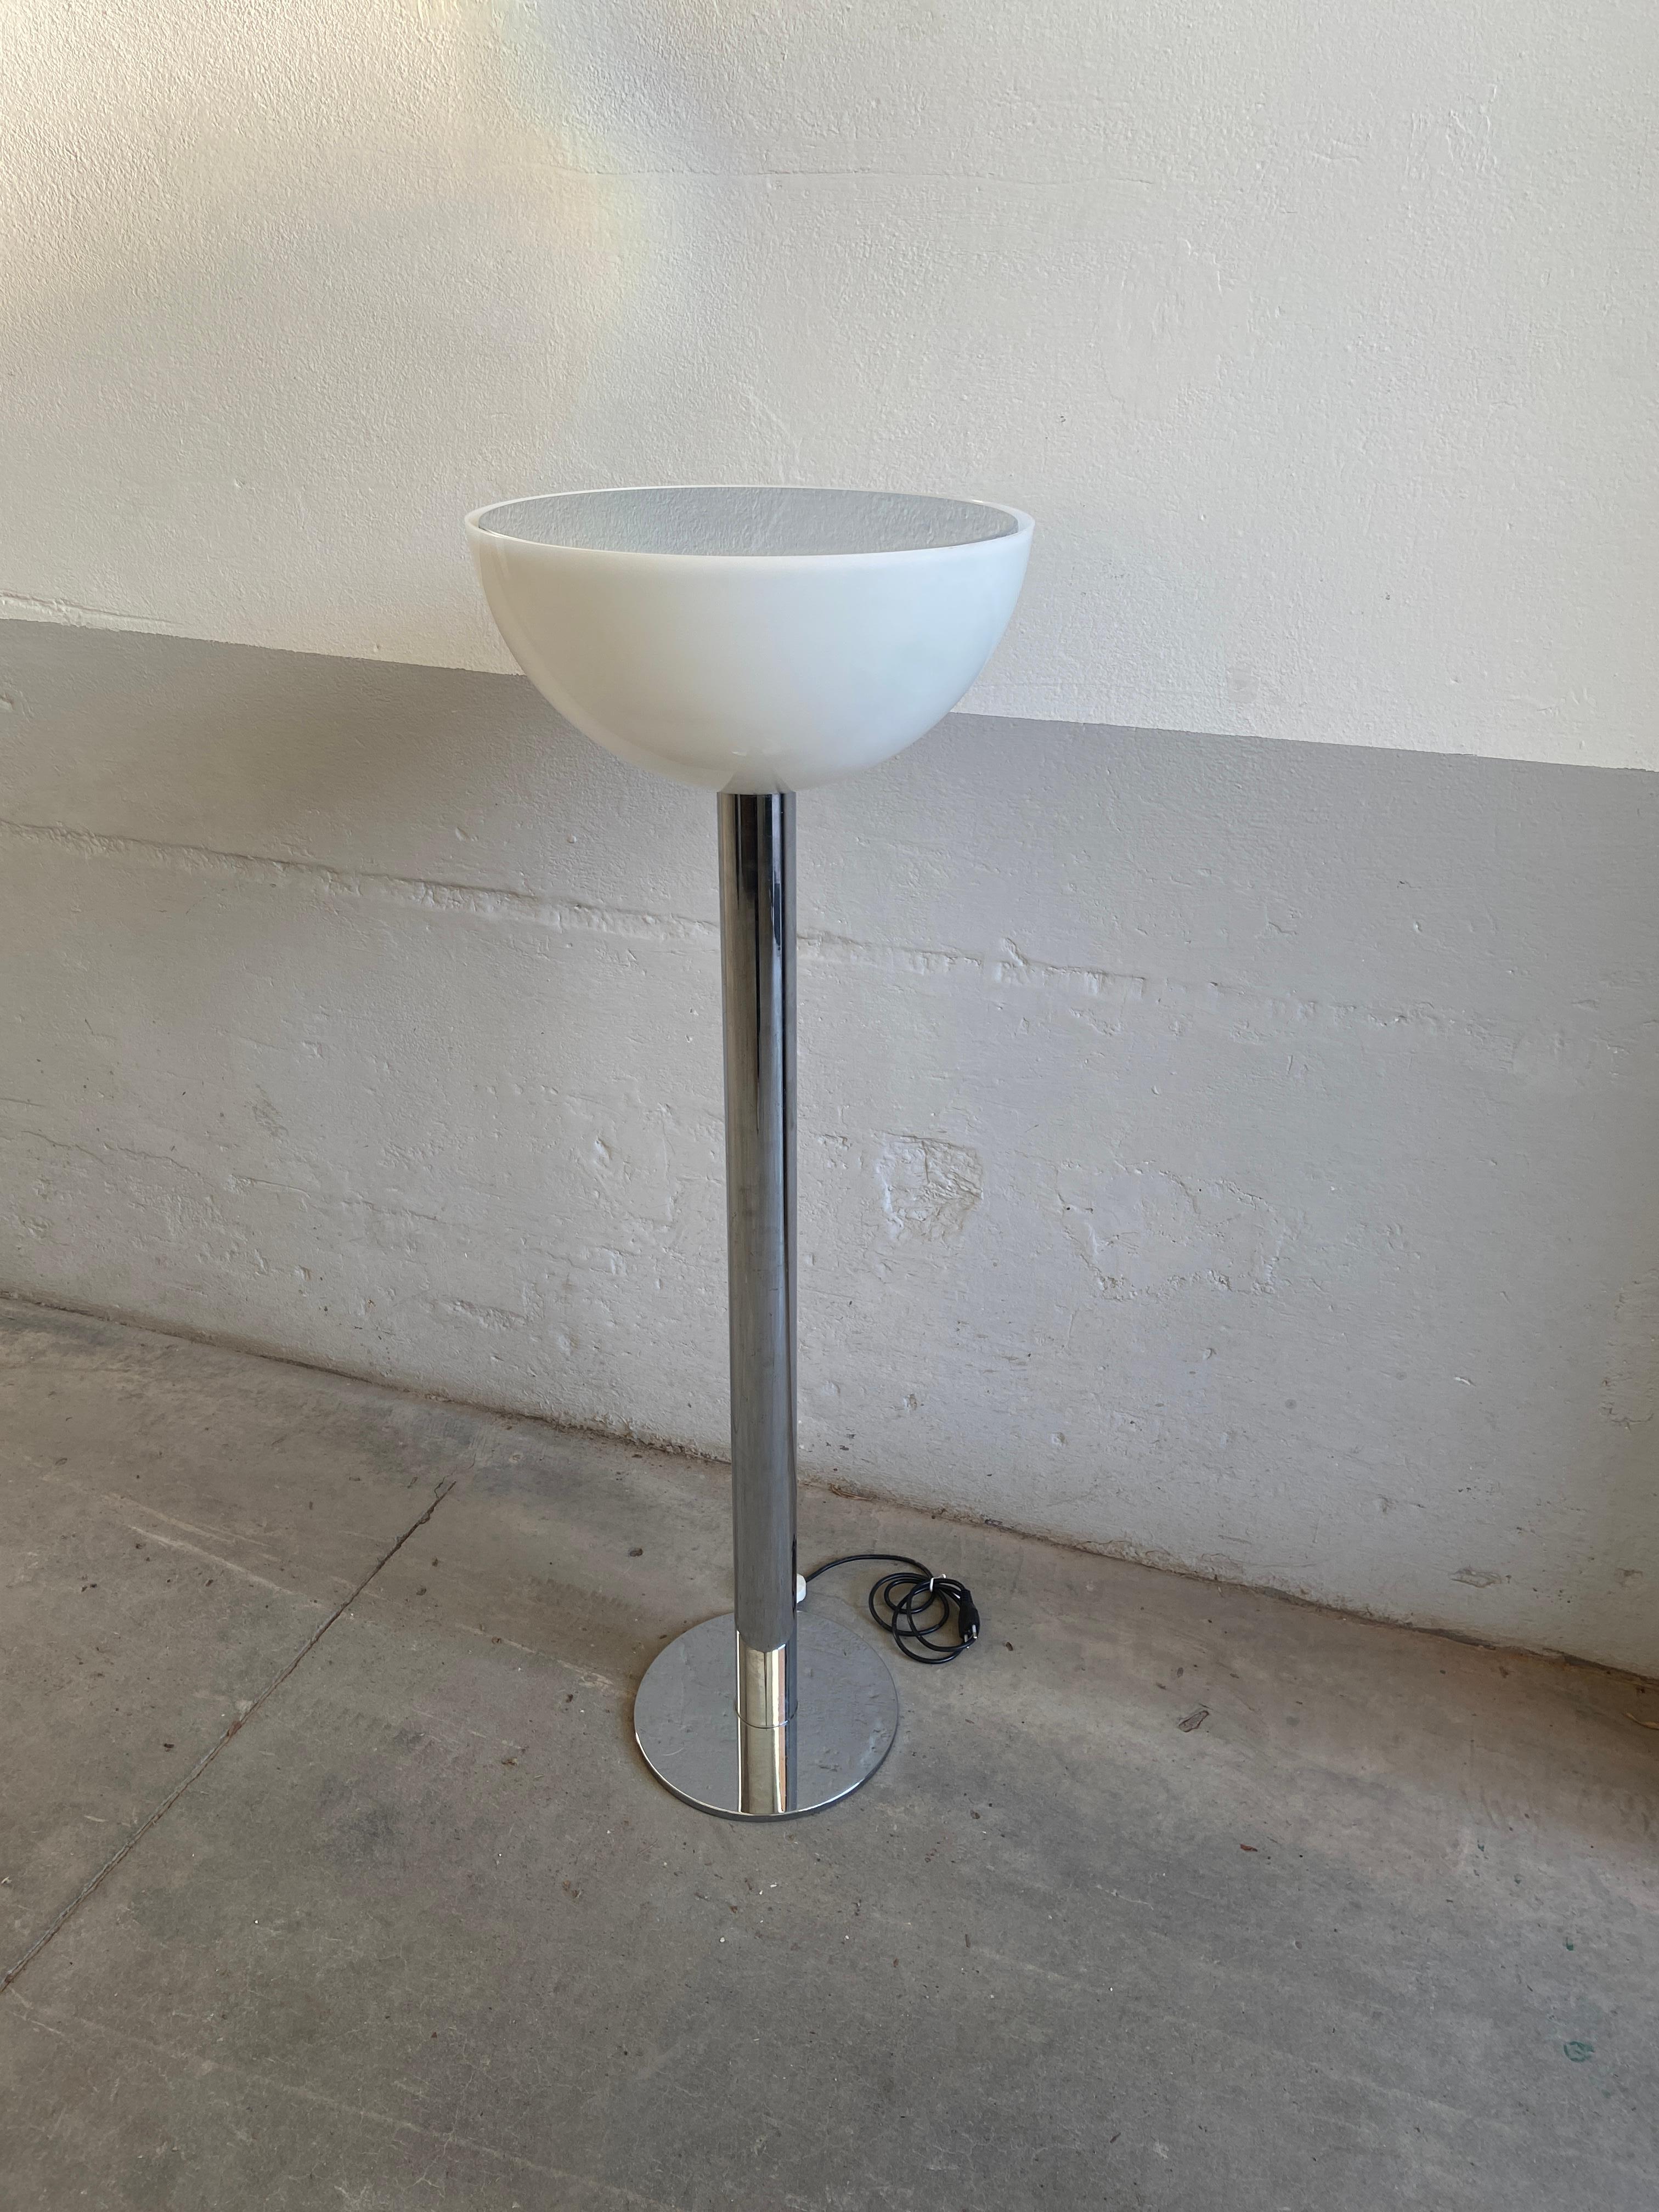 Mid-Century Modern Italian chrome floor lamp with white acrylic lampshade.
The lampshade has a mirrored top to hide the light bulb
The lamp is in very good vintage conditions and has European electrification.